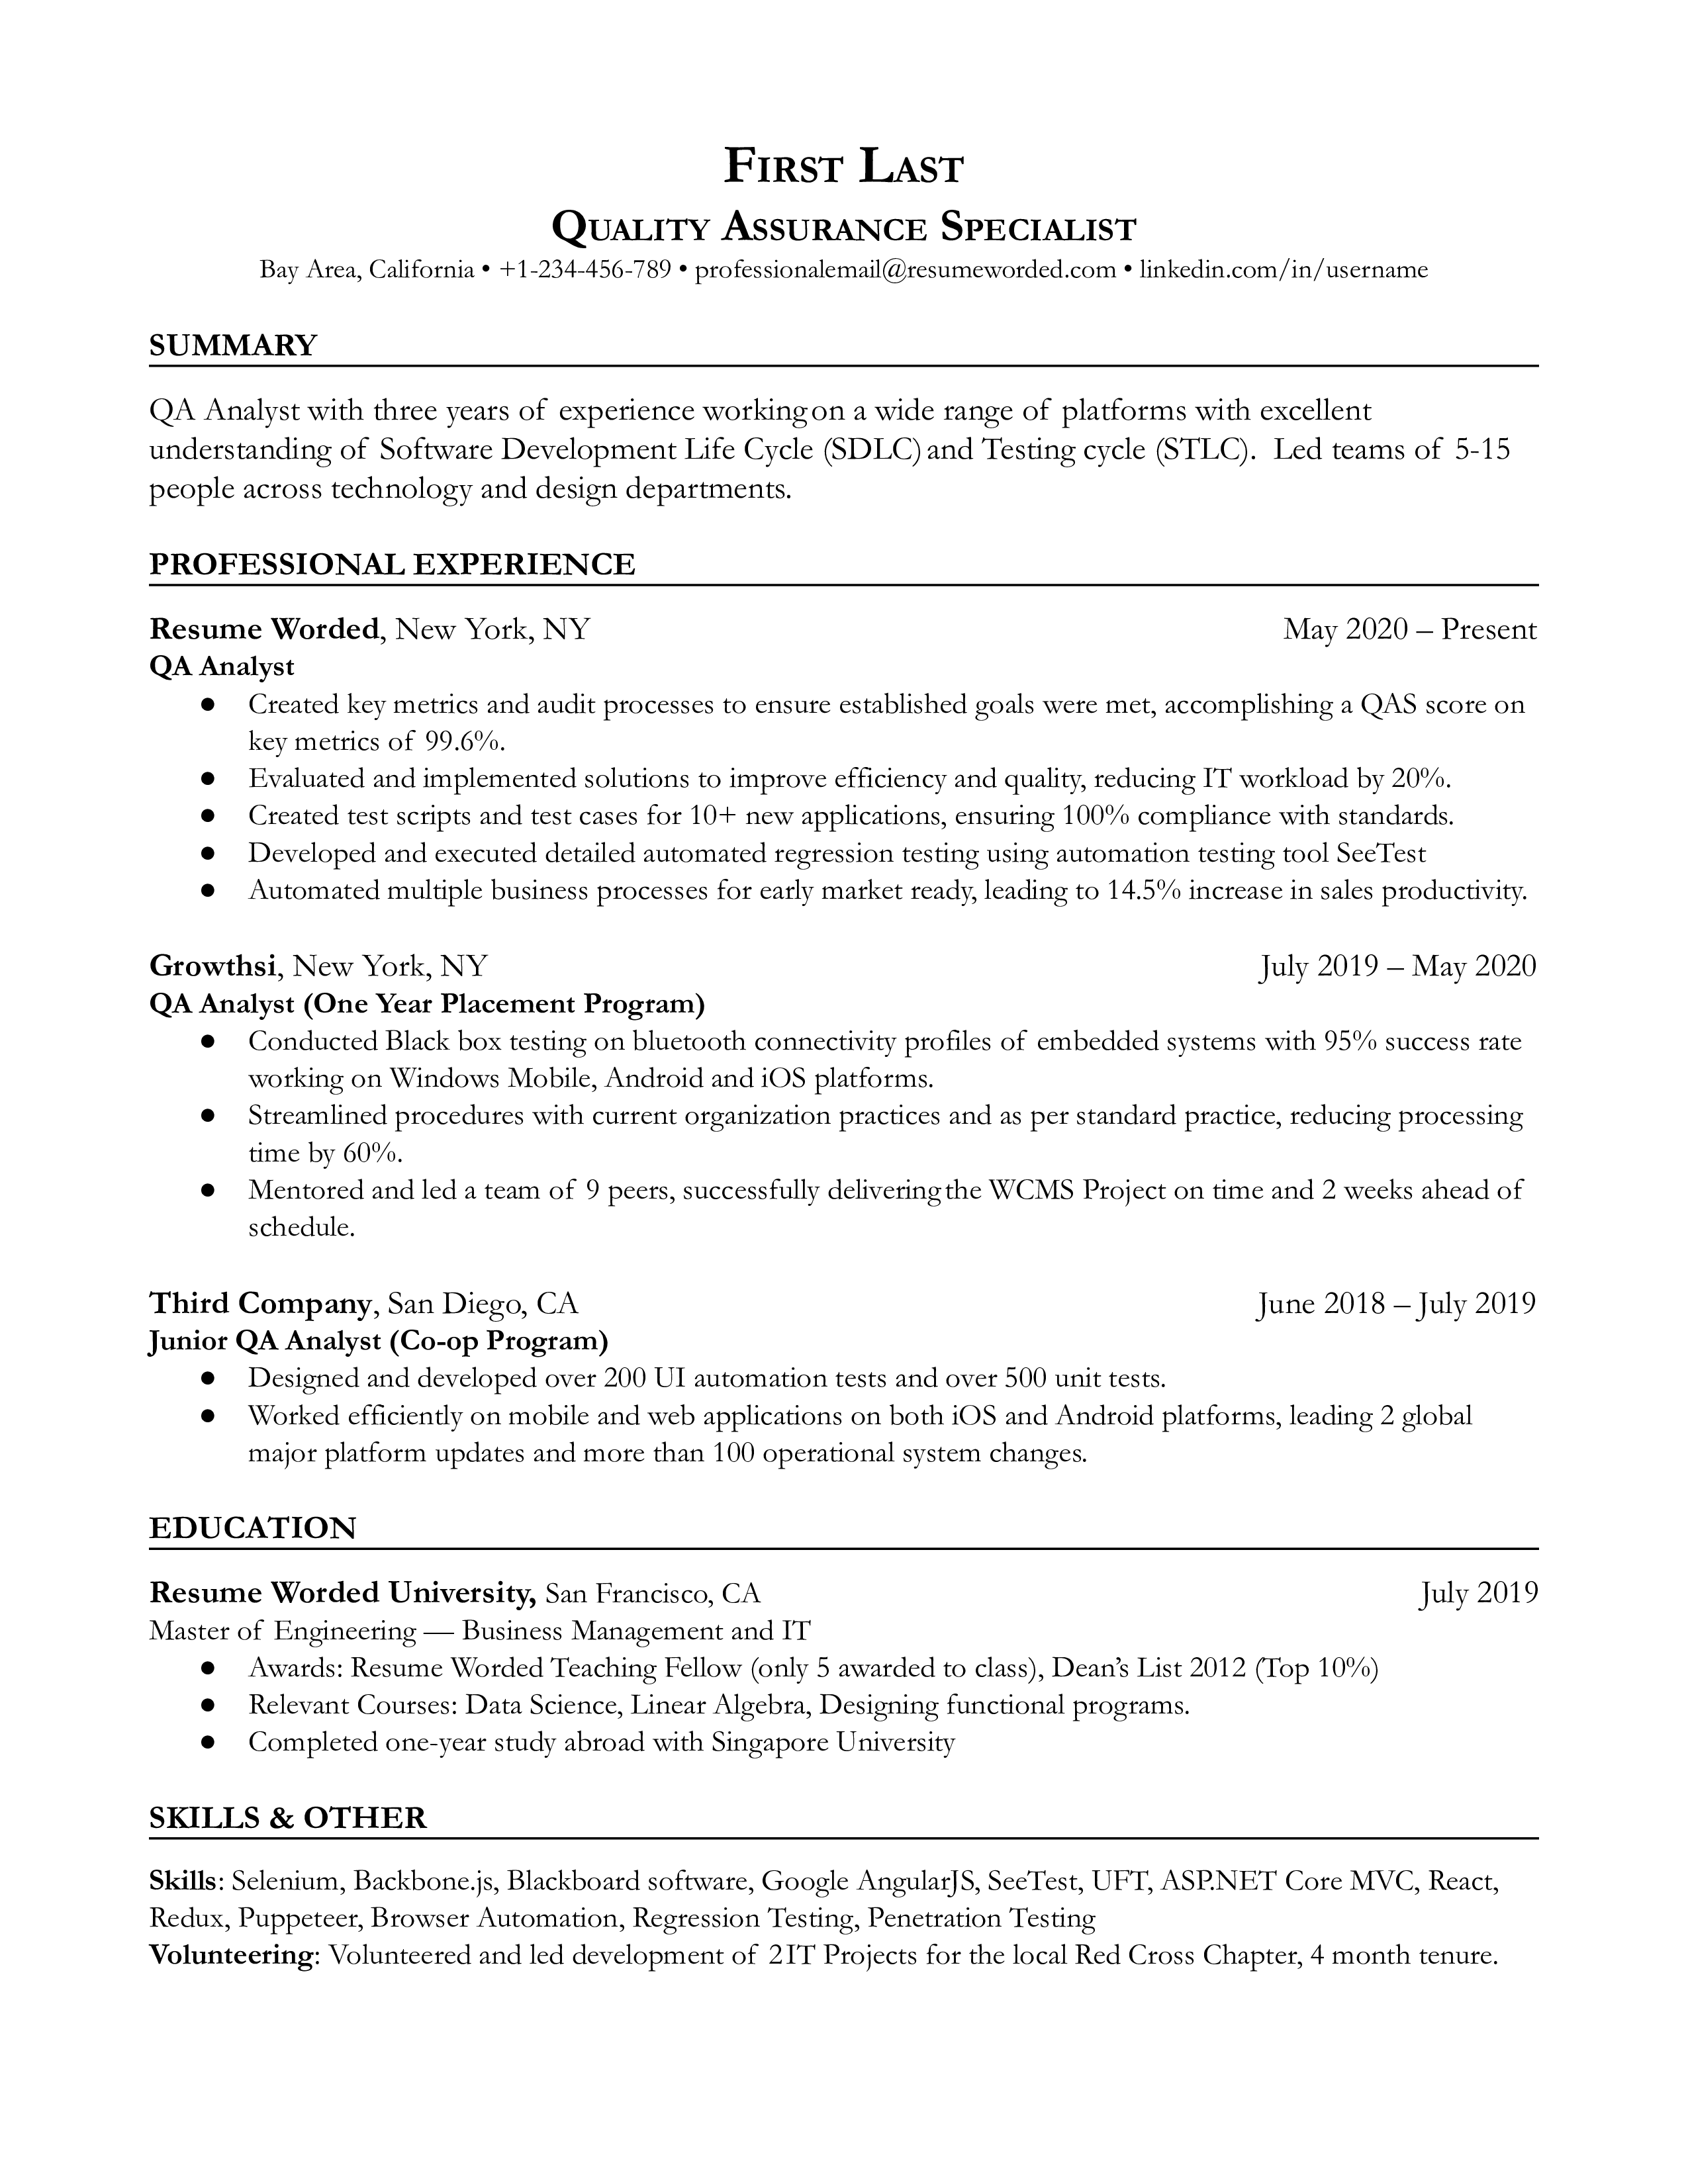 Quality Assurance Analyst's resume with focus on testing tools and project management skills.